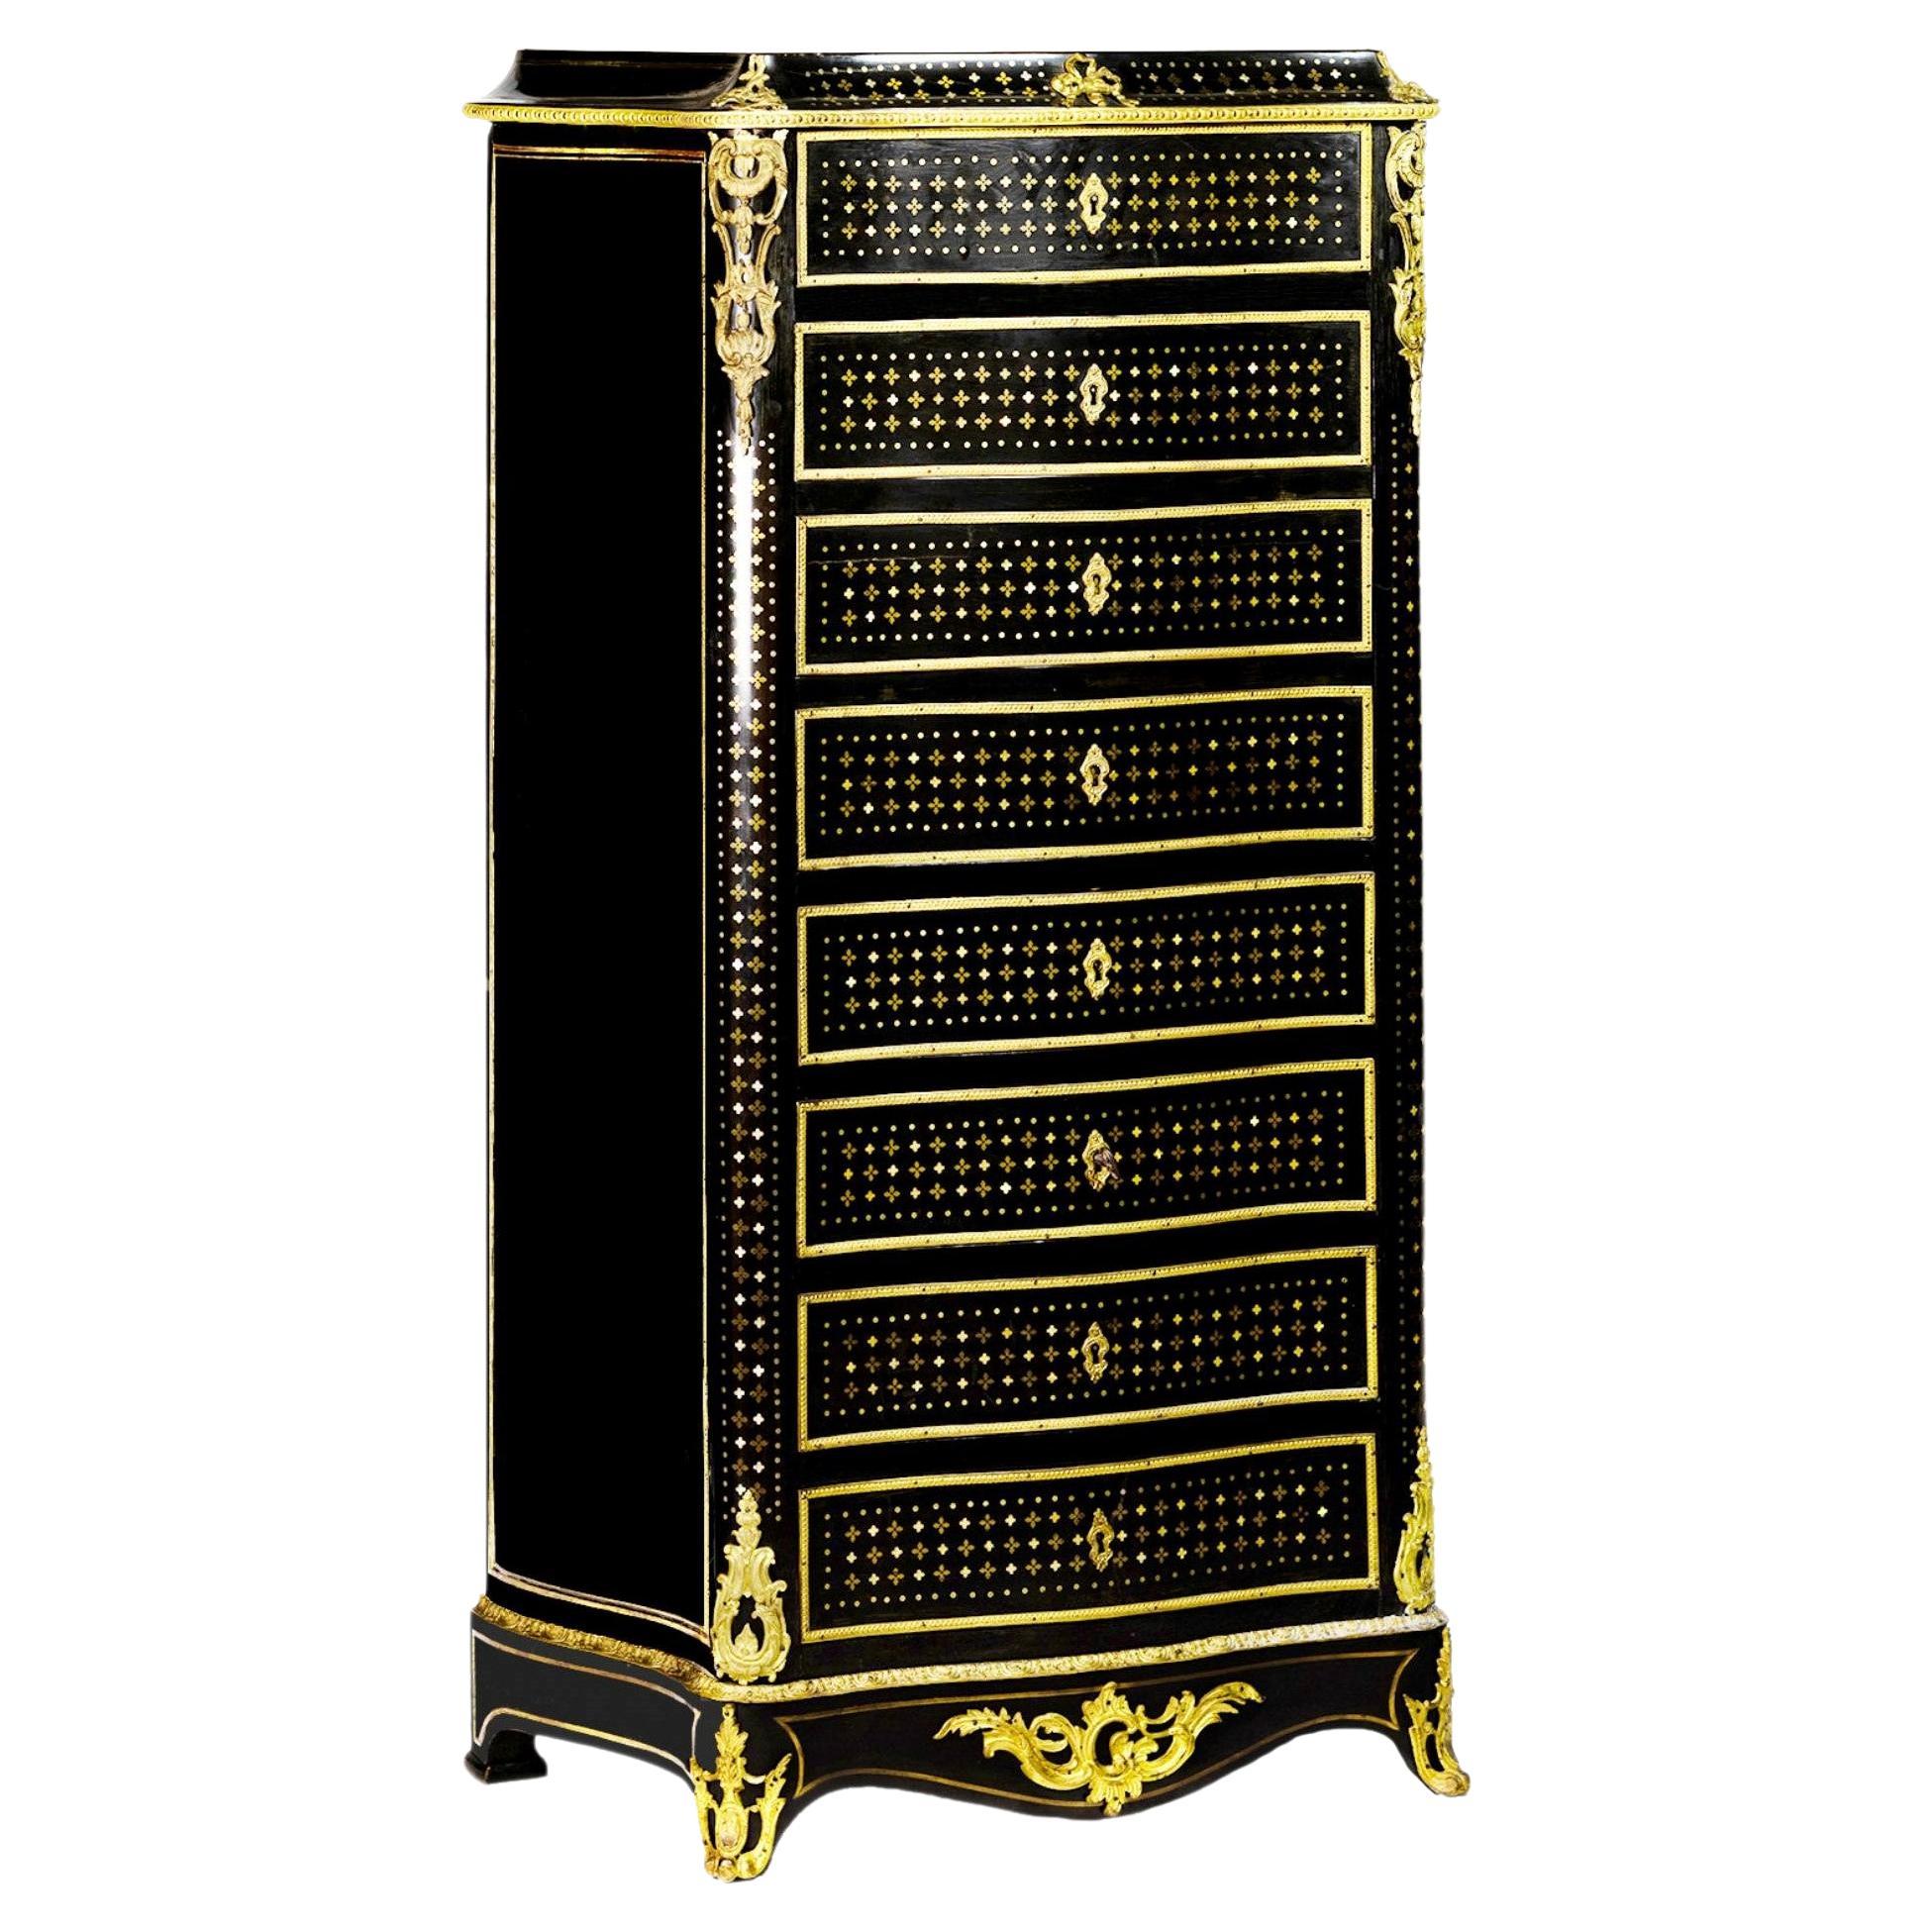 A 19th century French Louis XVI Style Lacquer and Gilded Secretaire with marble top, drop front section. 
Profuse marquetry and five drawer frames and the interior with one drawer in Boulle À La Reine,  holly veneered with inlaid nacre (mother of